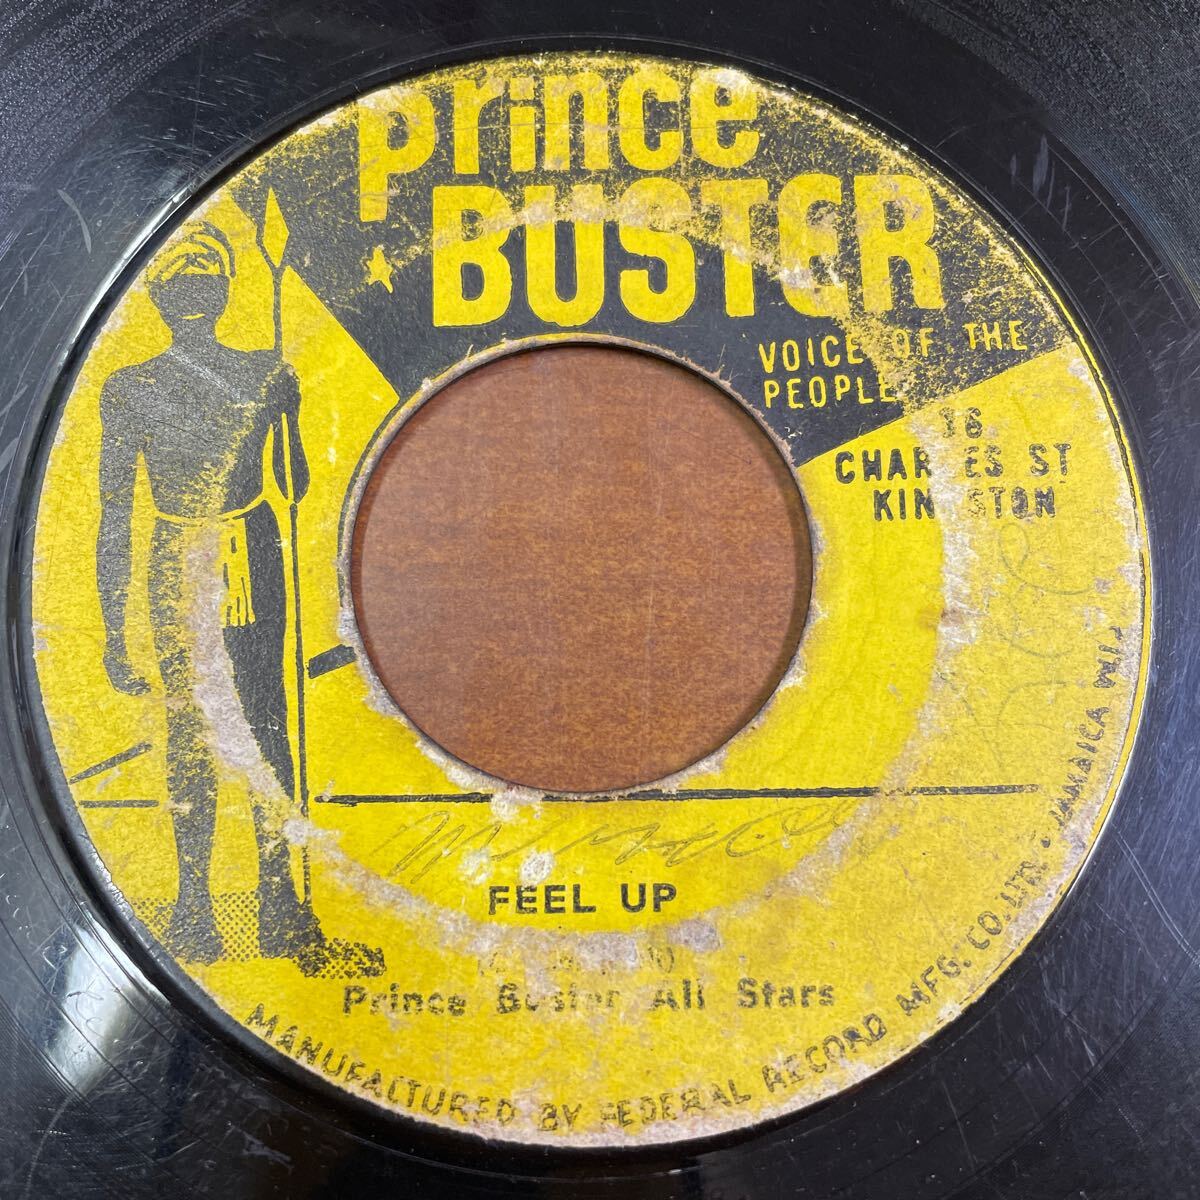 Prince Buster - Feel Up / Too Late (Voice of the People)の画像2